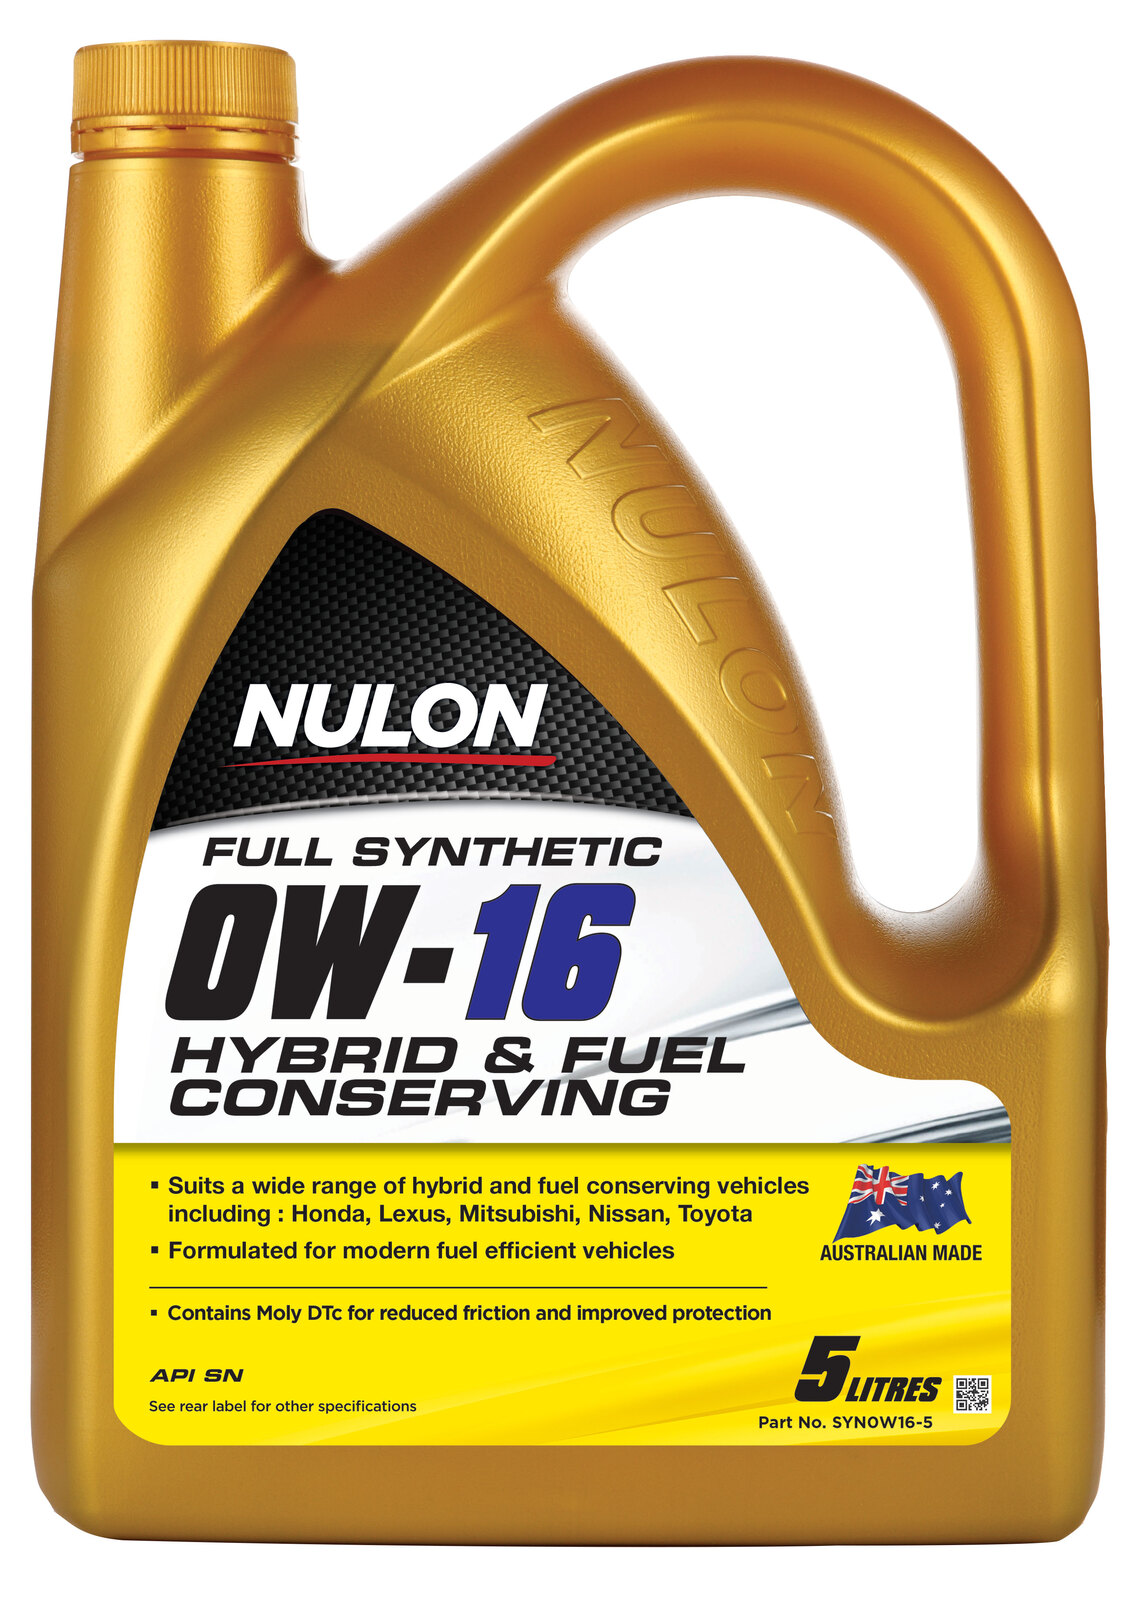 NULON Full Synthetic 0W-16 Hybrid & Fuel Conserving, Each